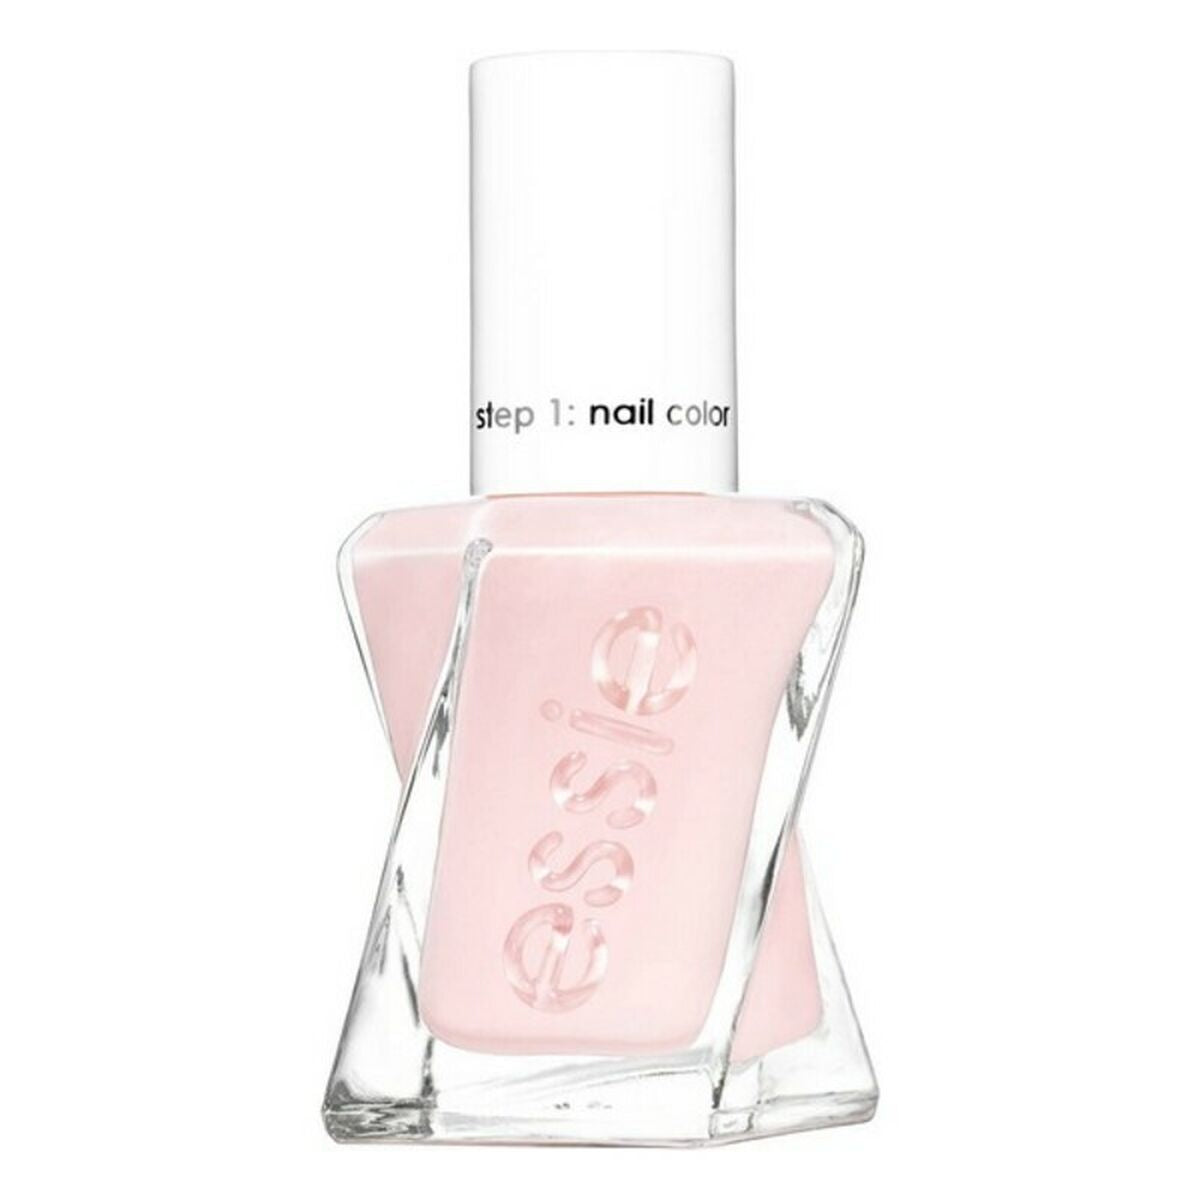 nail polish Couture Essie 484-matter of fiction (13,5 ml) - Calm Beauty IE